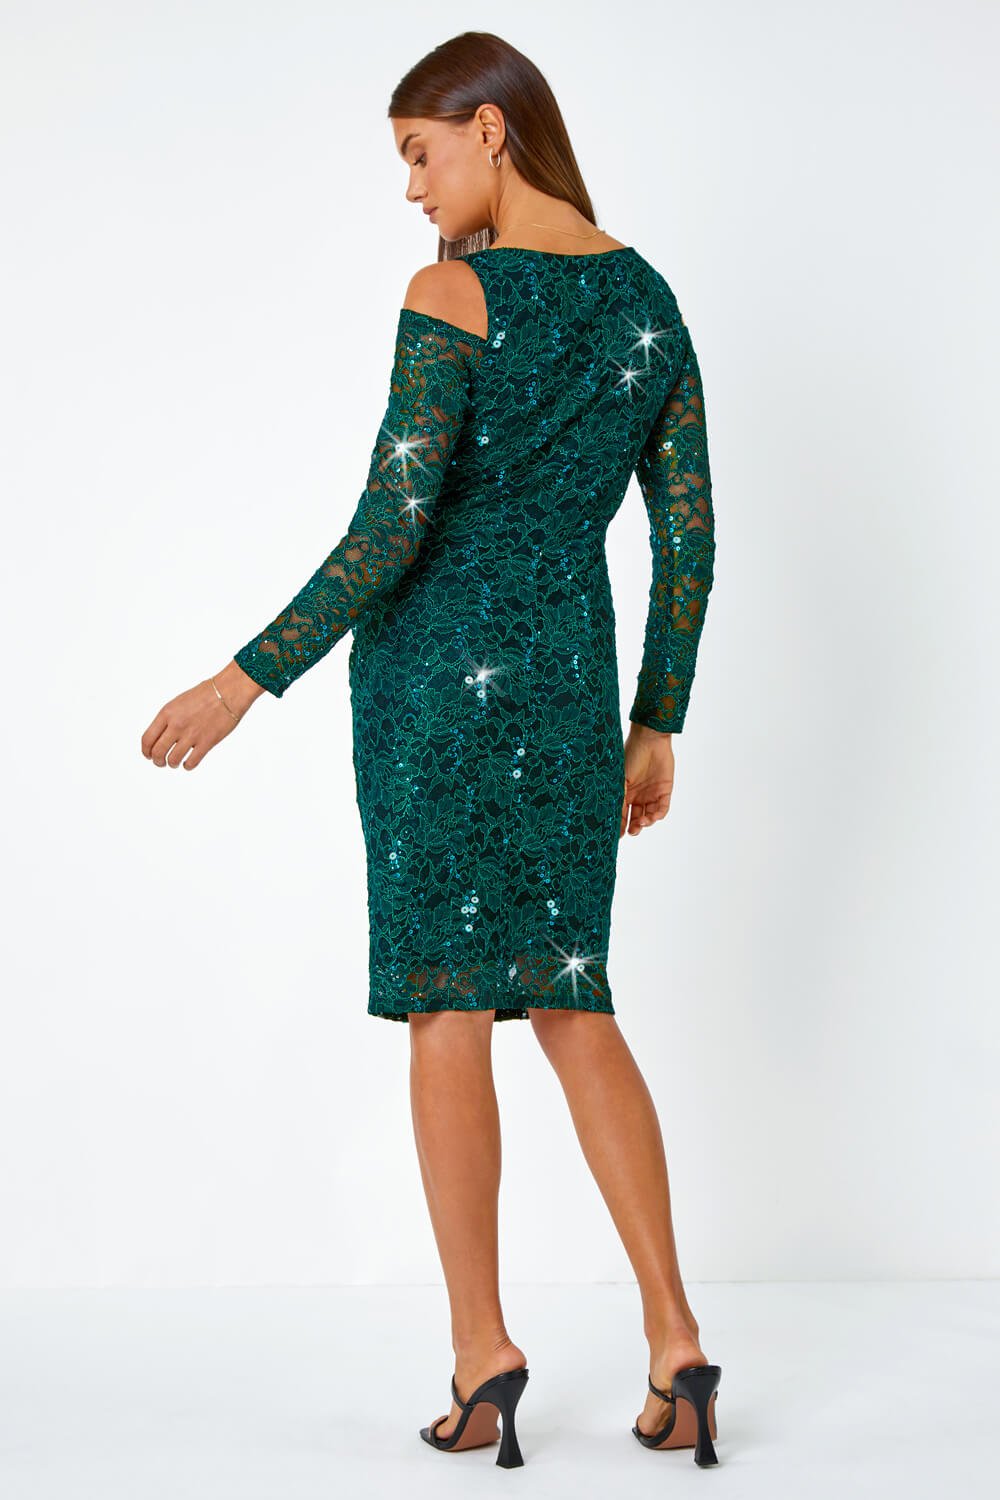 Green Sequin Cold Shoulder Lace Midi Stretch Dress, Image 3 of 5